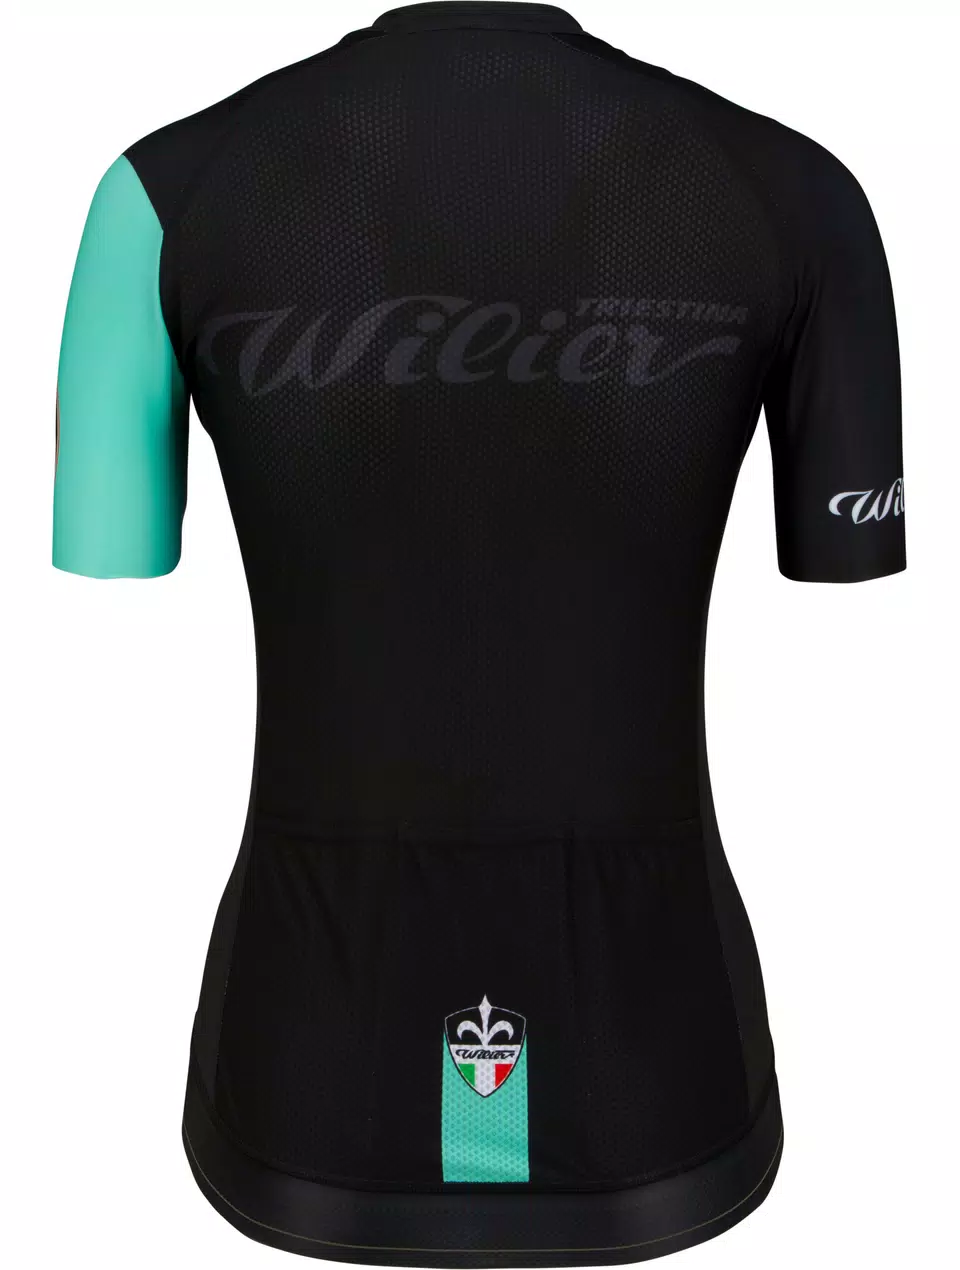 Femme maillot Wilier Cycling Club noir